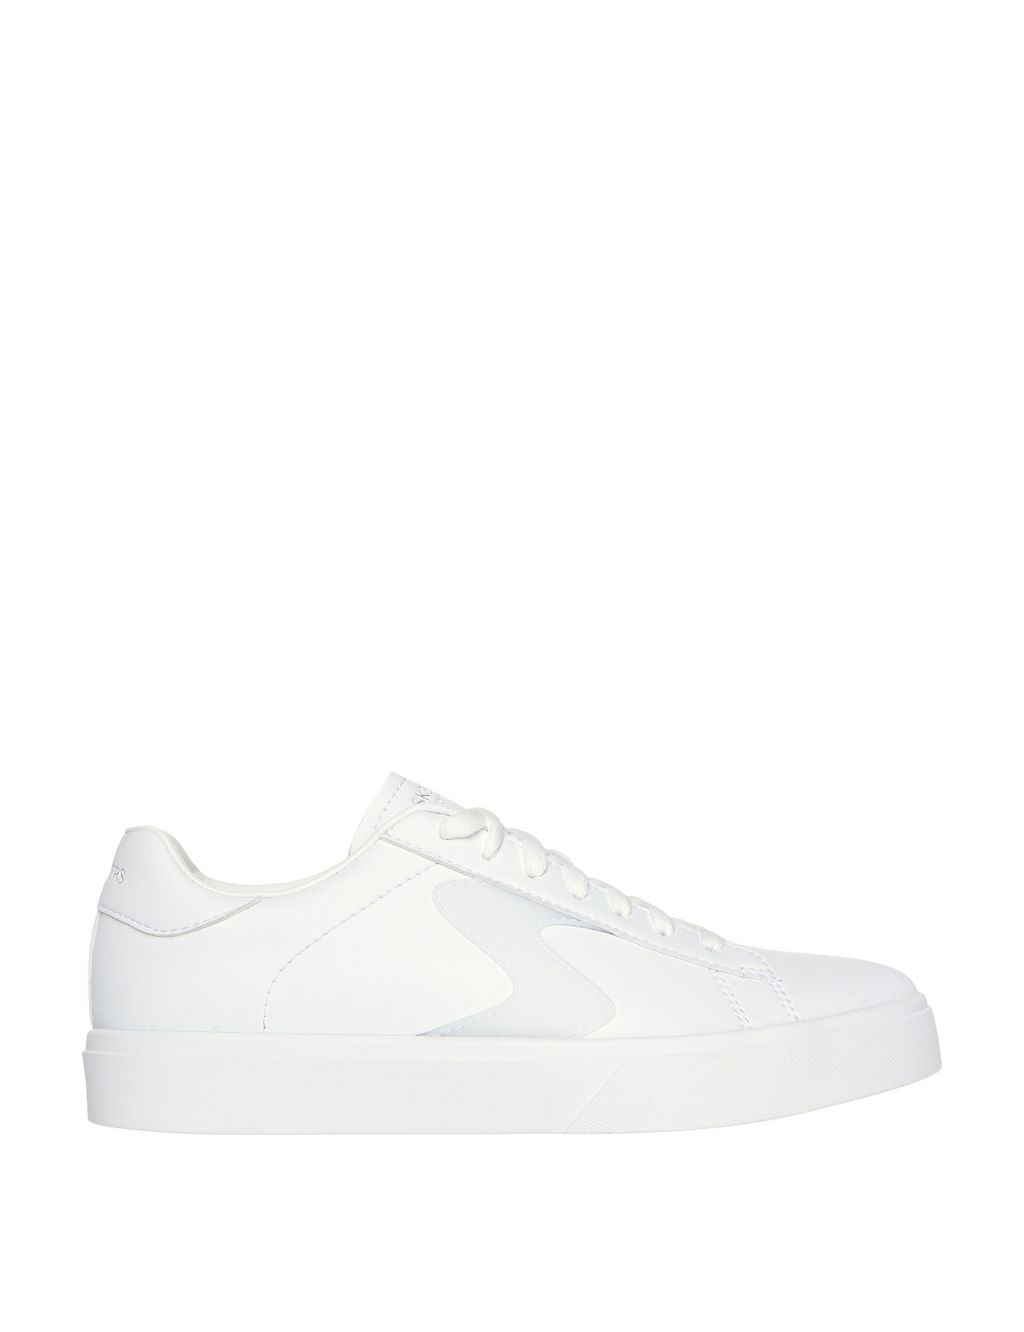 Eden LX Top Grade Lace Up Trainers